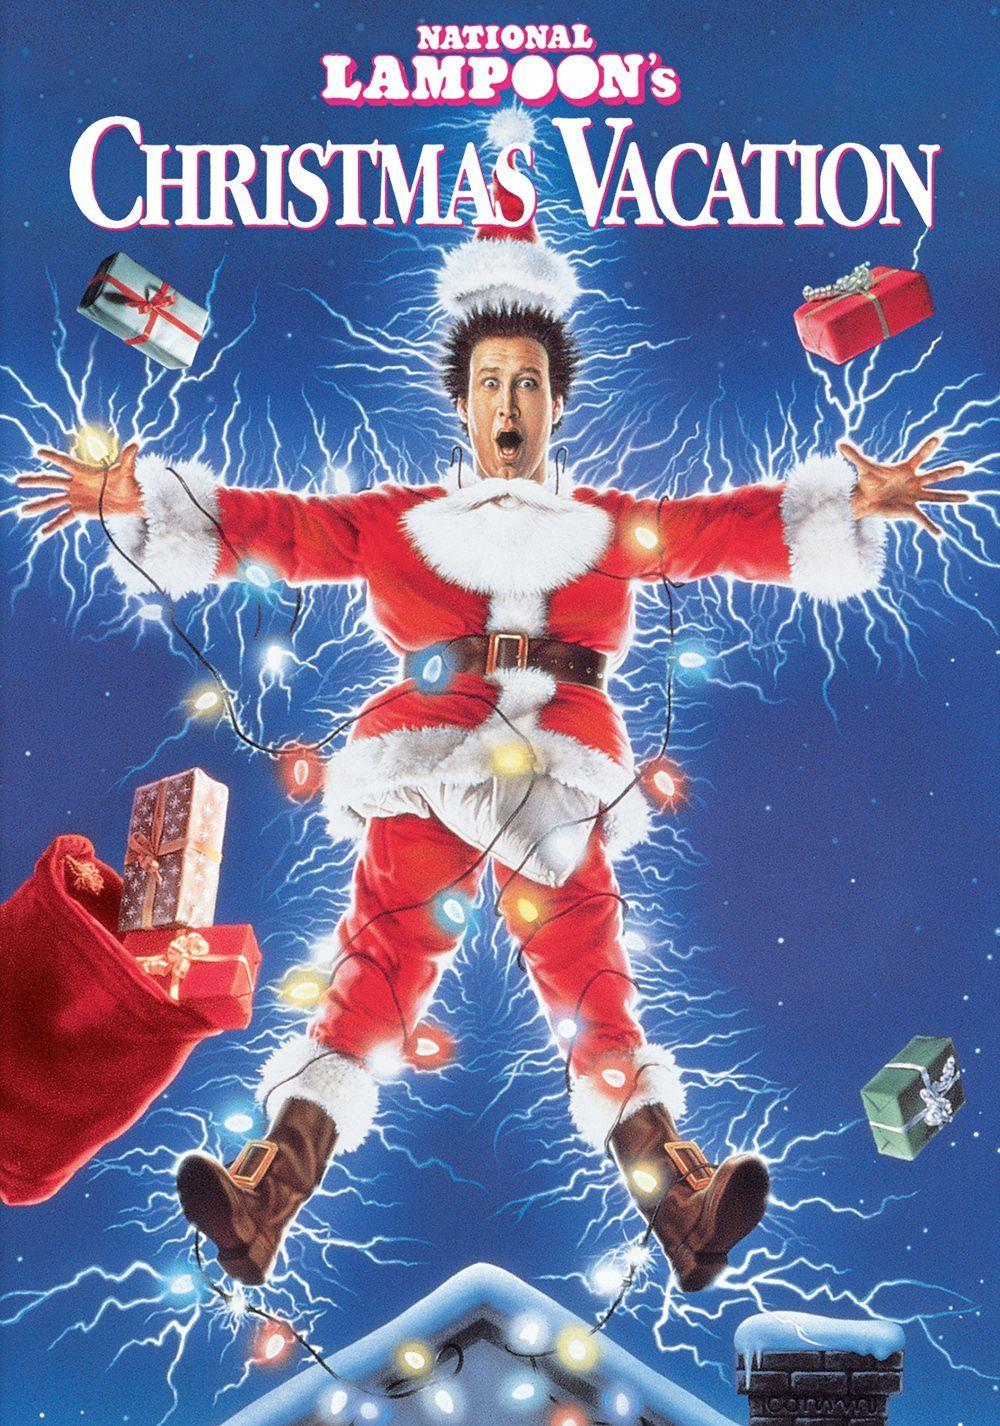 iPhone Wallpaper: National Lampoon's Christmas Vacation Wallpaper for. Best christmas movies, National lampoons christmas vacation movie, Funny christmas movies